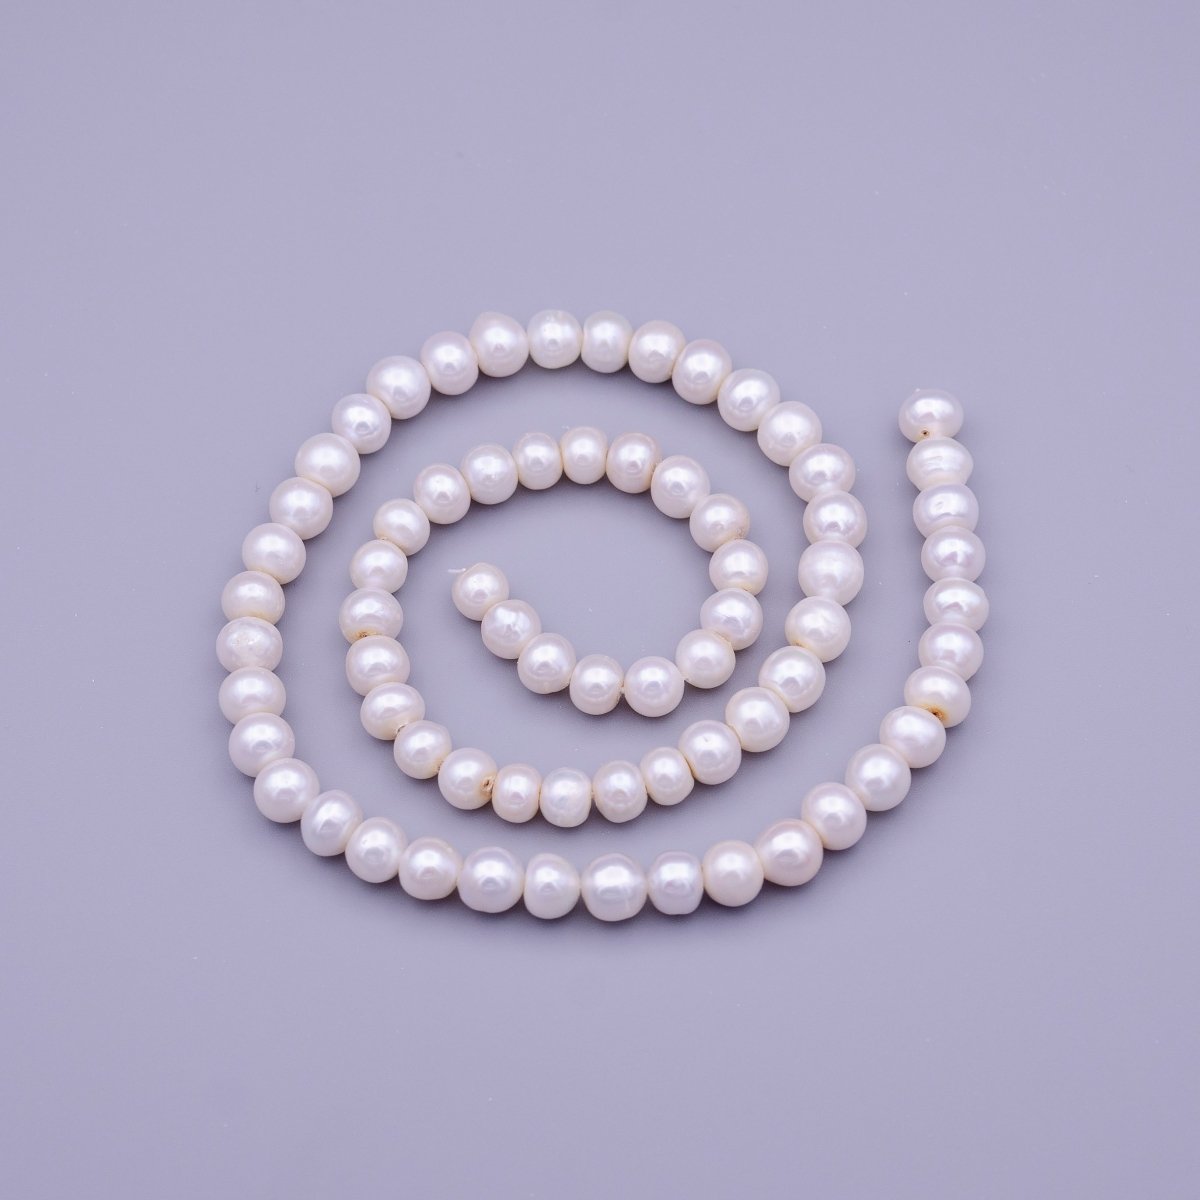 6.5mm Natural AAA Nugget Freshwater Pearl Bead 70pcs Full Strand | WA-1322 Clearance Pricing - DLUXCA